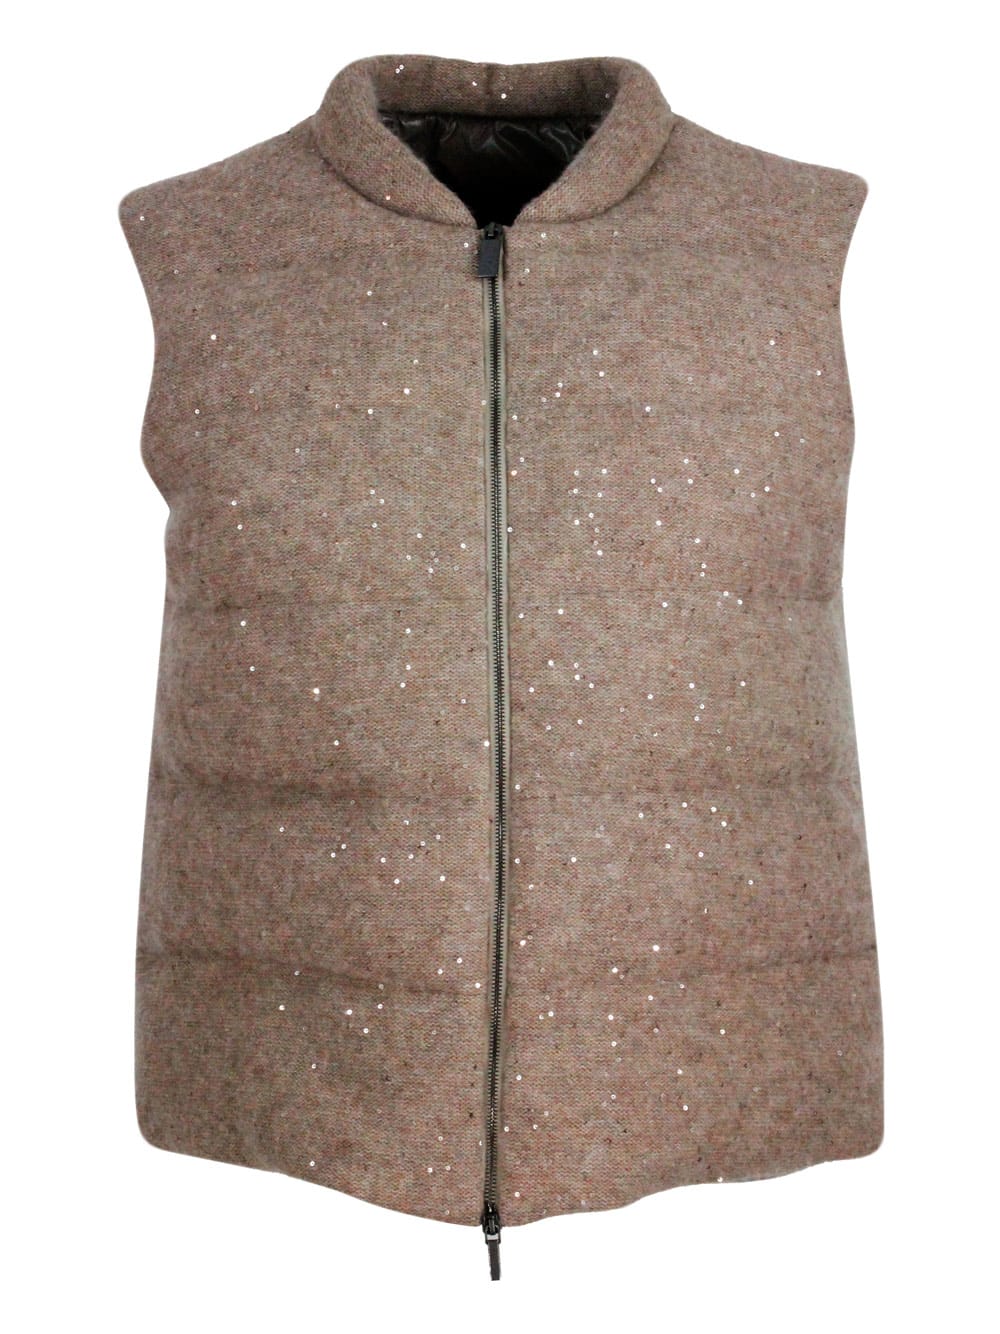 Fabiana Filippi Sleeveless Waistcoat Padded With Real Goose Down In Wool, Silk And Cashmere Embellished With Micro Sequin In Nut